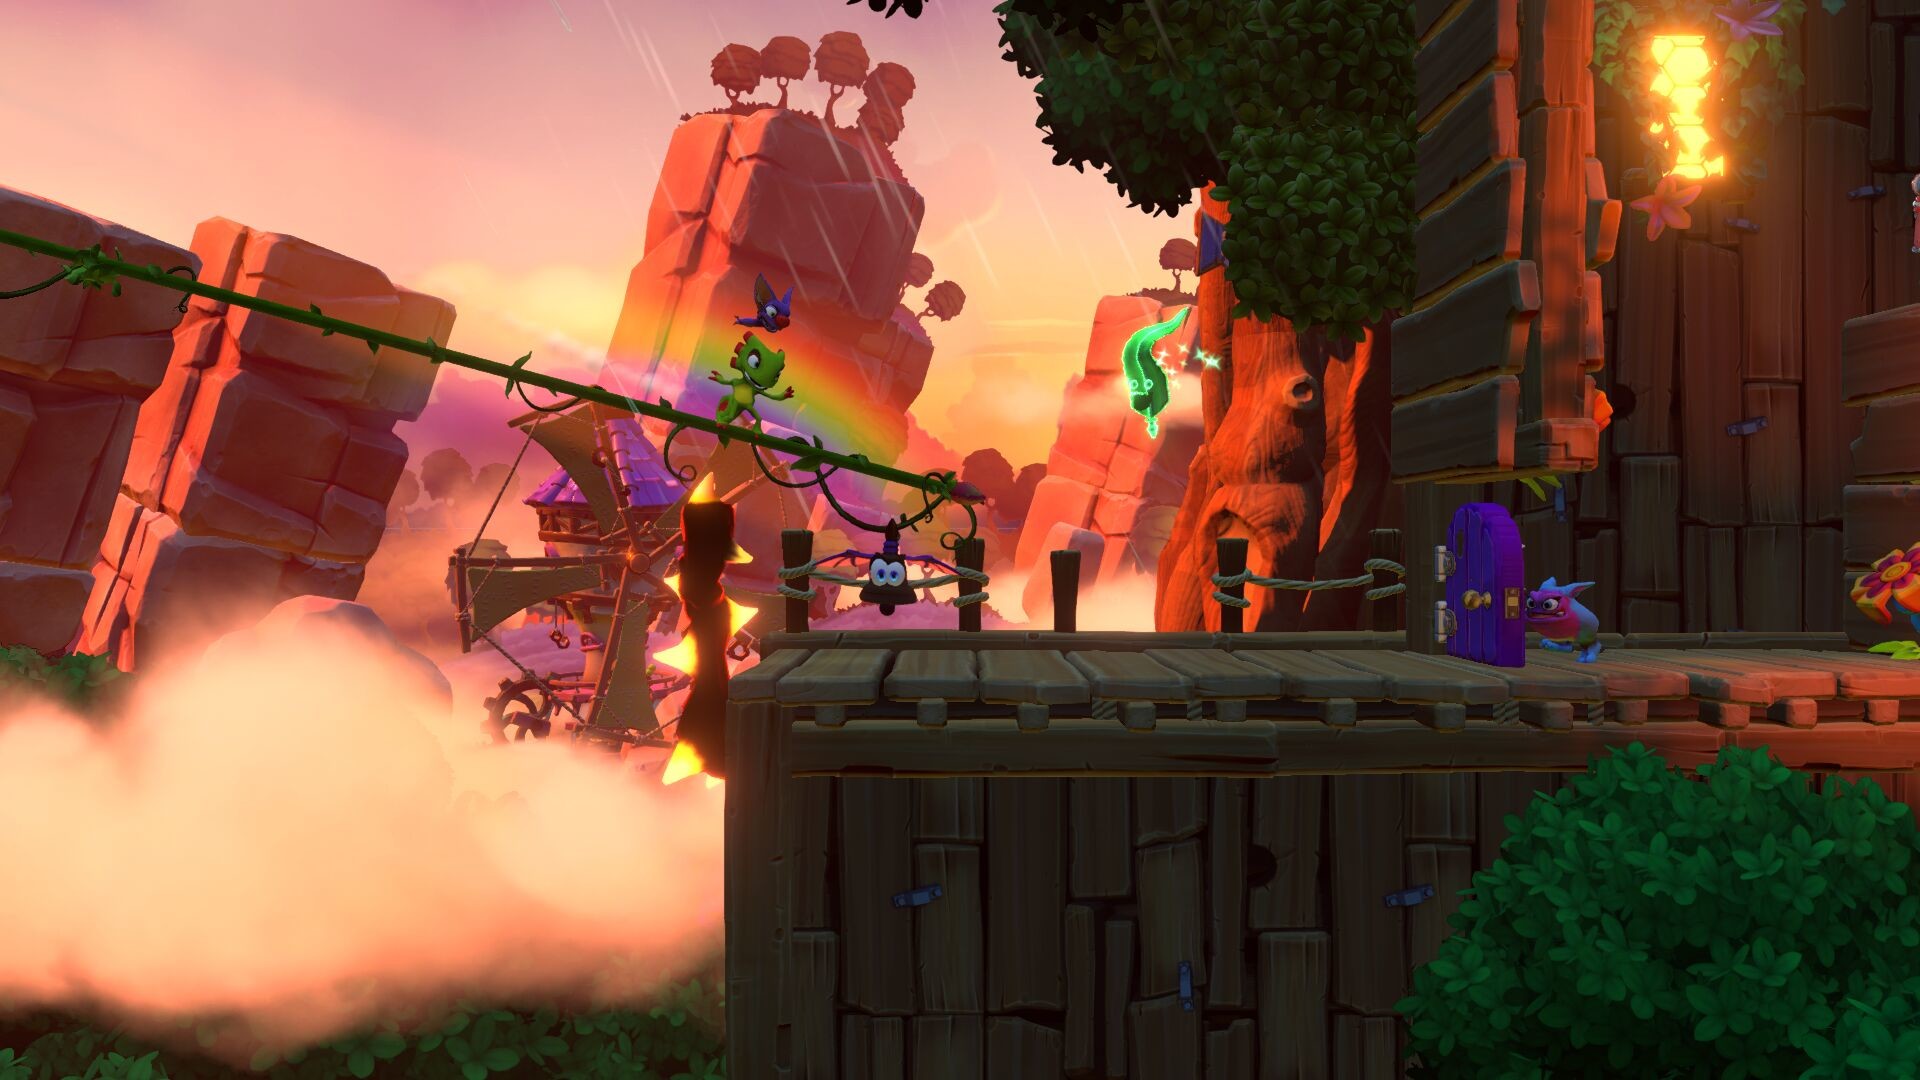 Yooka-Laylee and the Impossible Steam Lair on